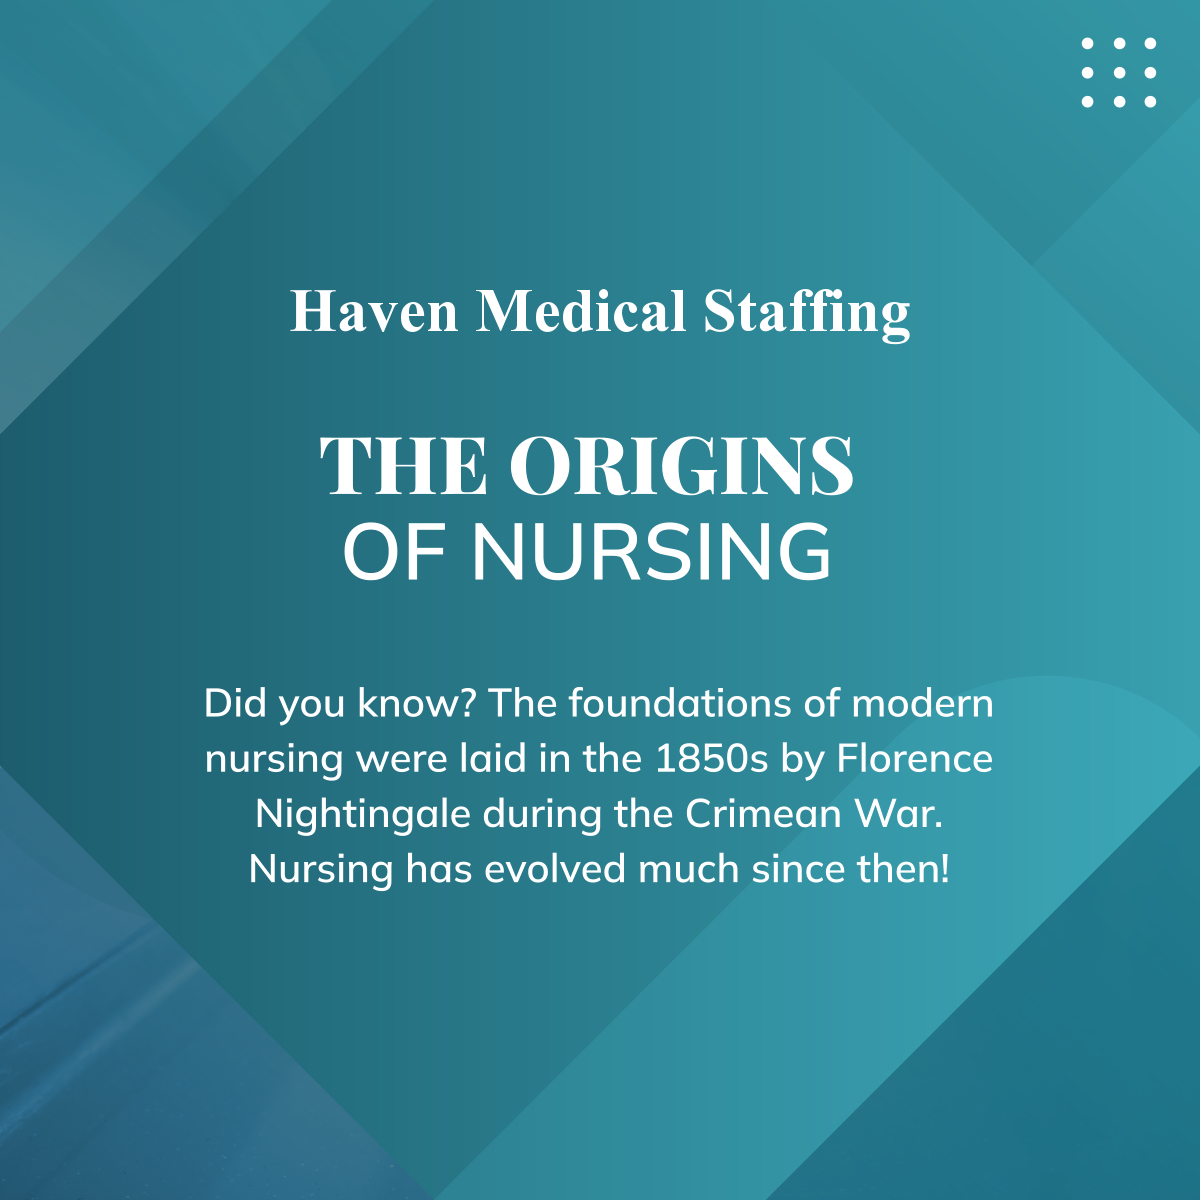 Inspired by the evolution of nursing? Recruit the modern Nightingales from our pool of nurses to elevate your healthcare services.

#NursingEvolution #HealthcareStaffing #FresnoCA